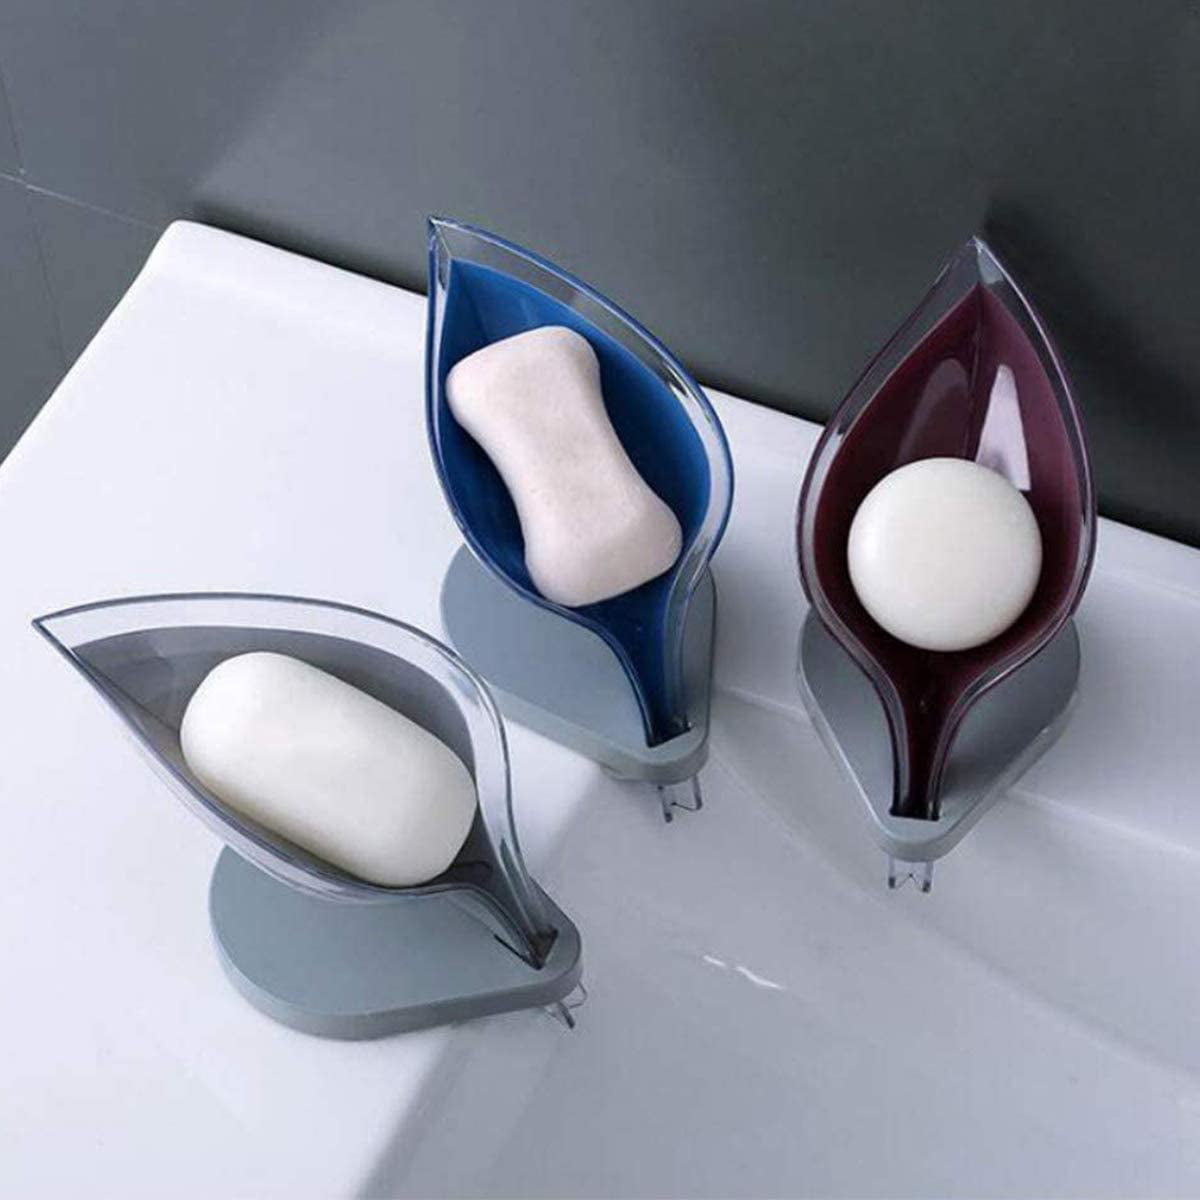 Soap Holder Leaf-Shape Self Draining with Suction Cup for Shower Bathroom 